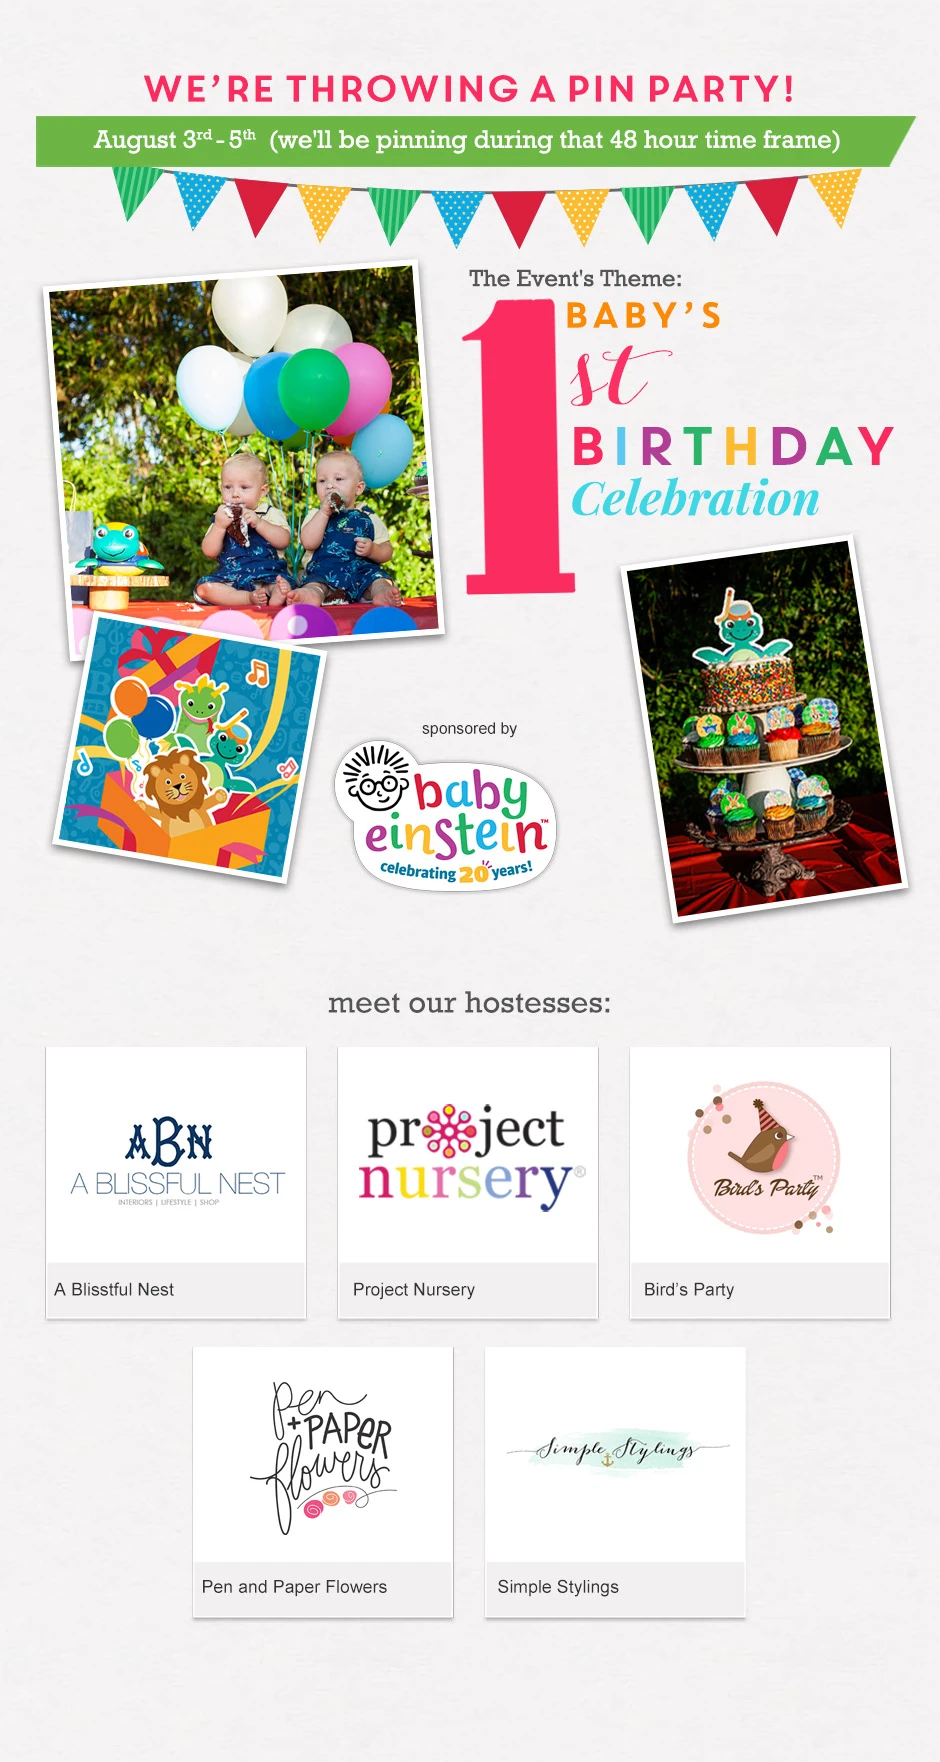 Baby's First Birthday Pin Party - Project Nursery